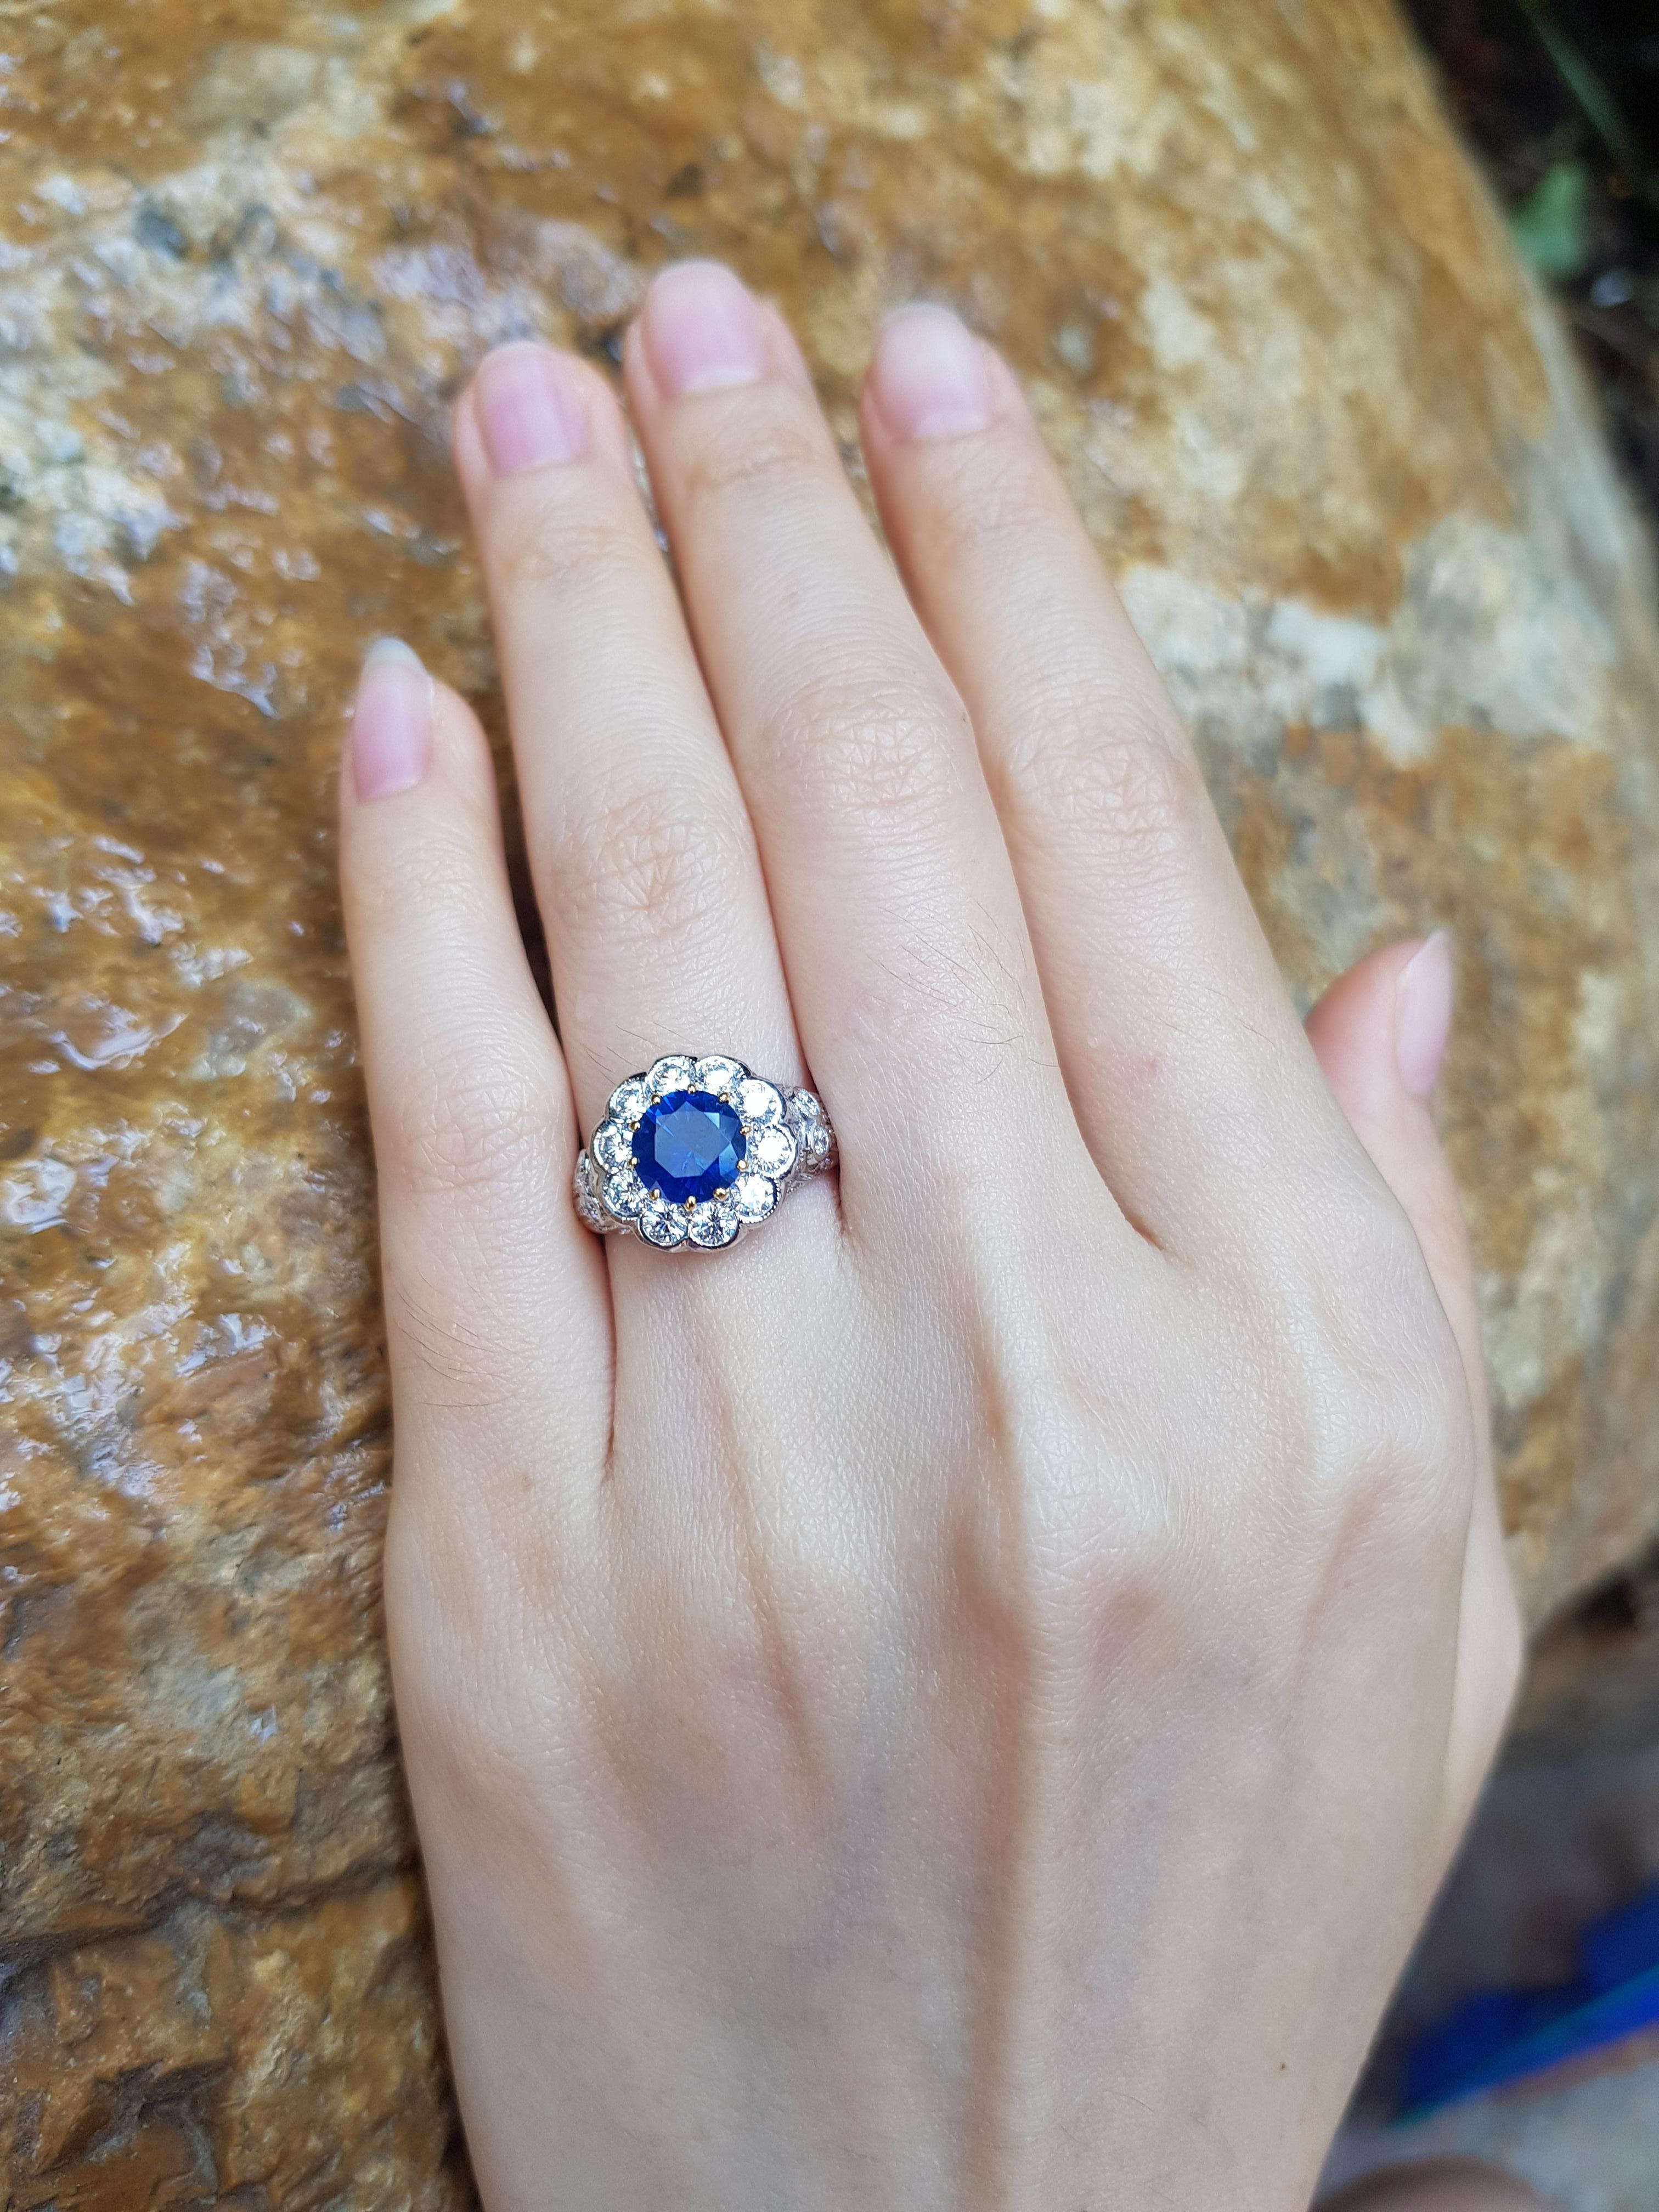 Blue Sapphire 1.44 carats with Diamond 0.87 carats Ring set in 18 Karat Gold Settings

Width: 1.2 cm
Length: 1.2 cm 
Ring Size: 50

